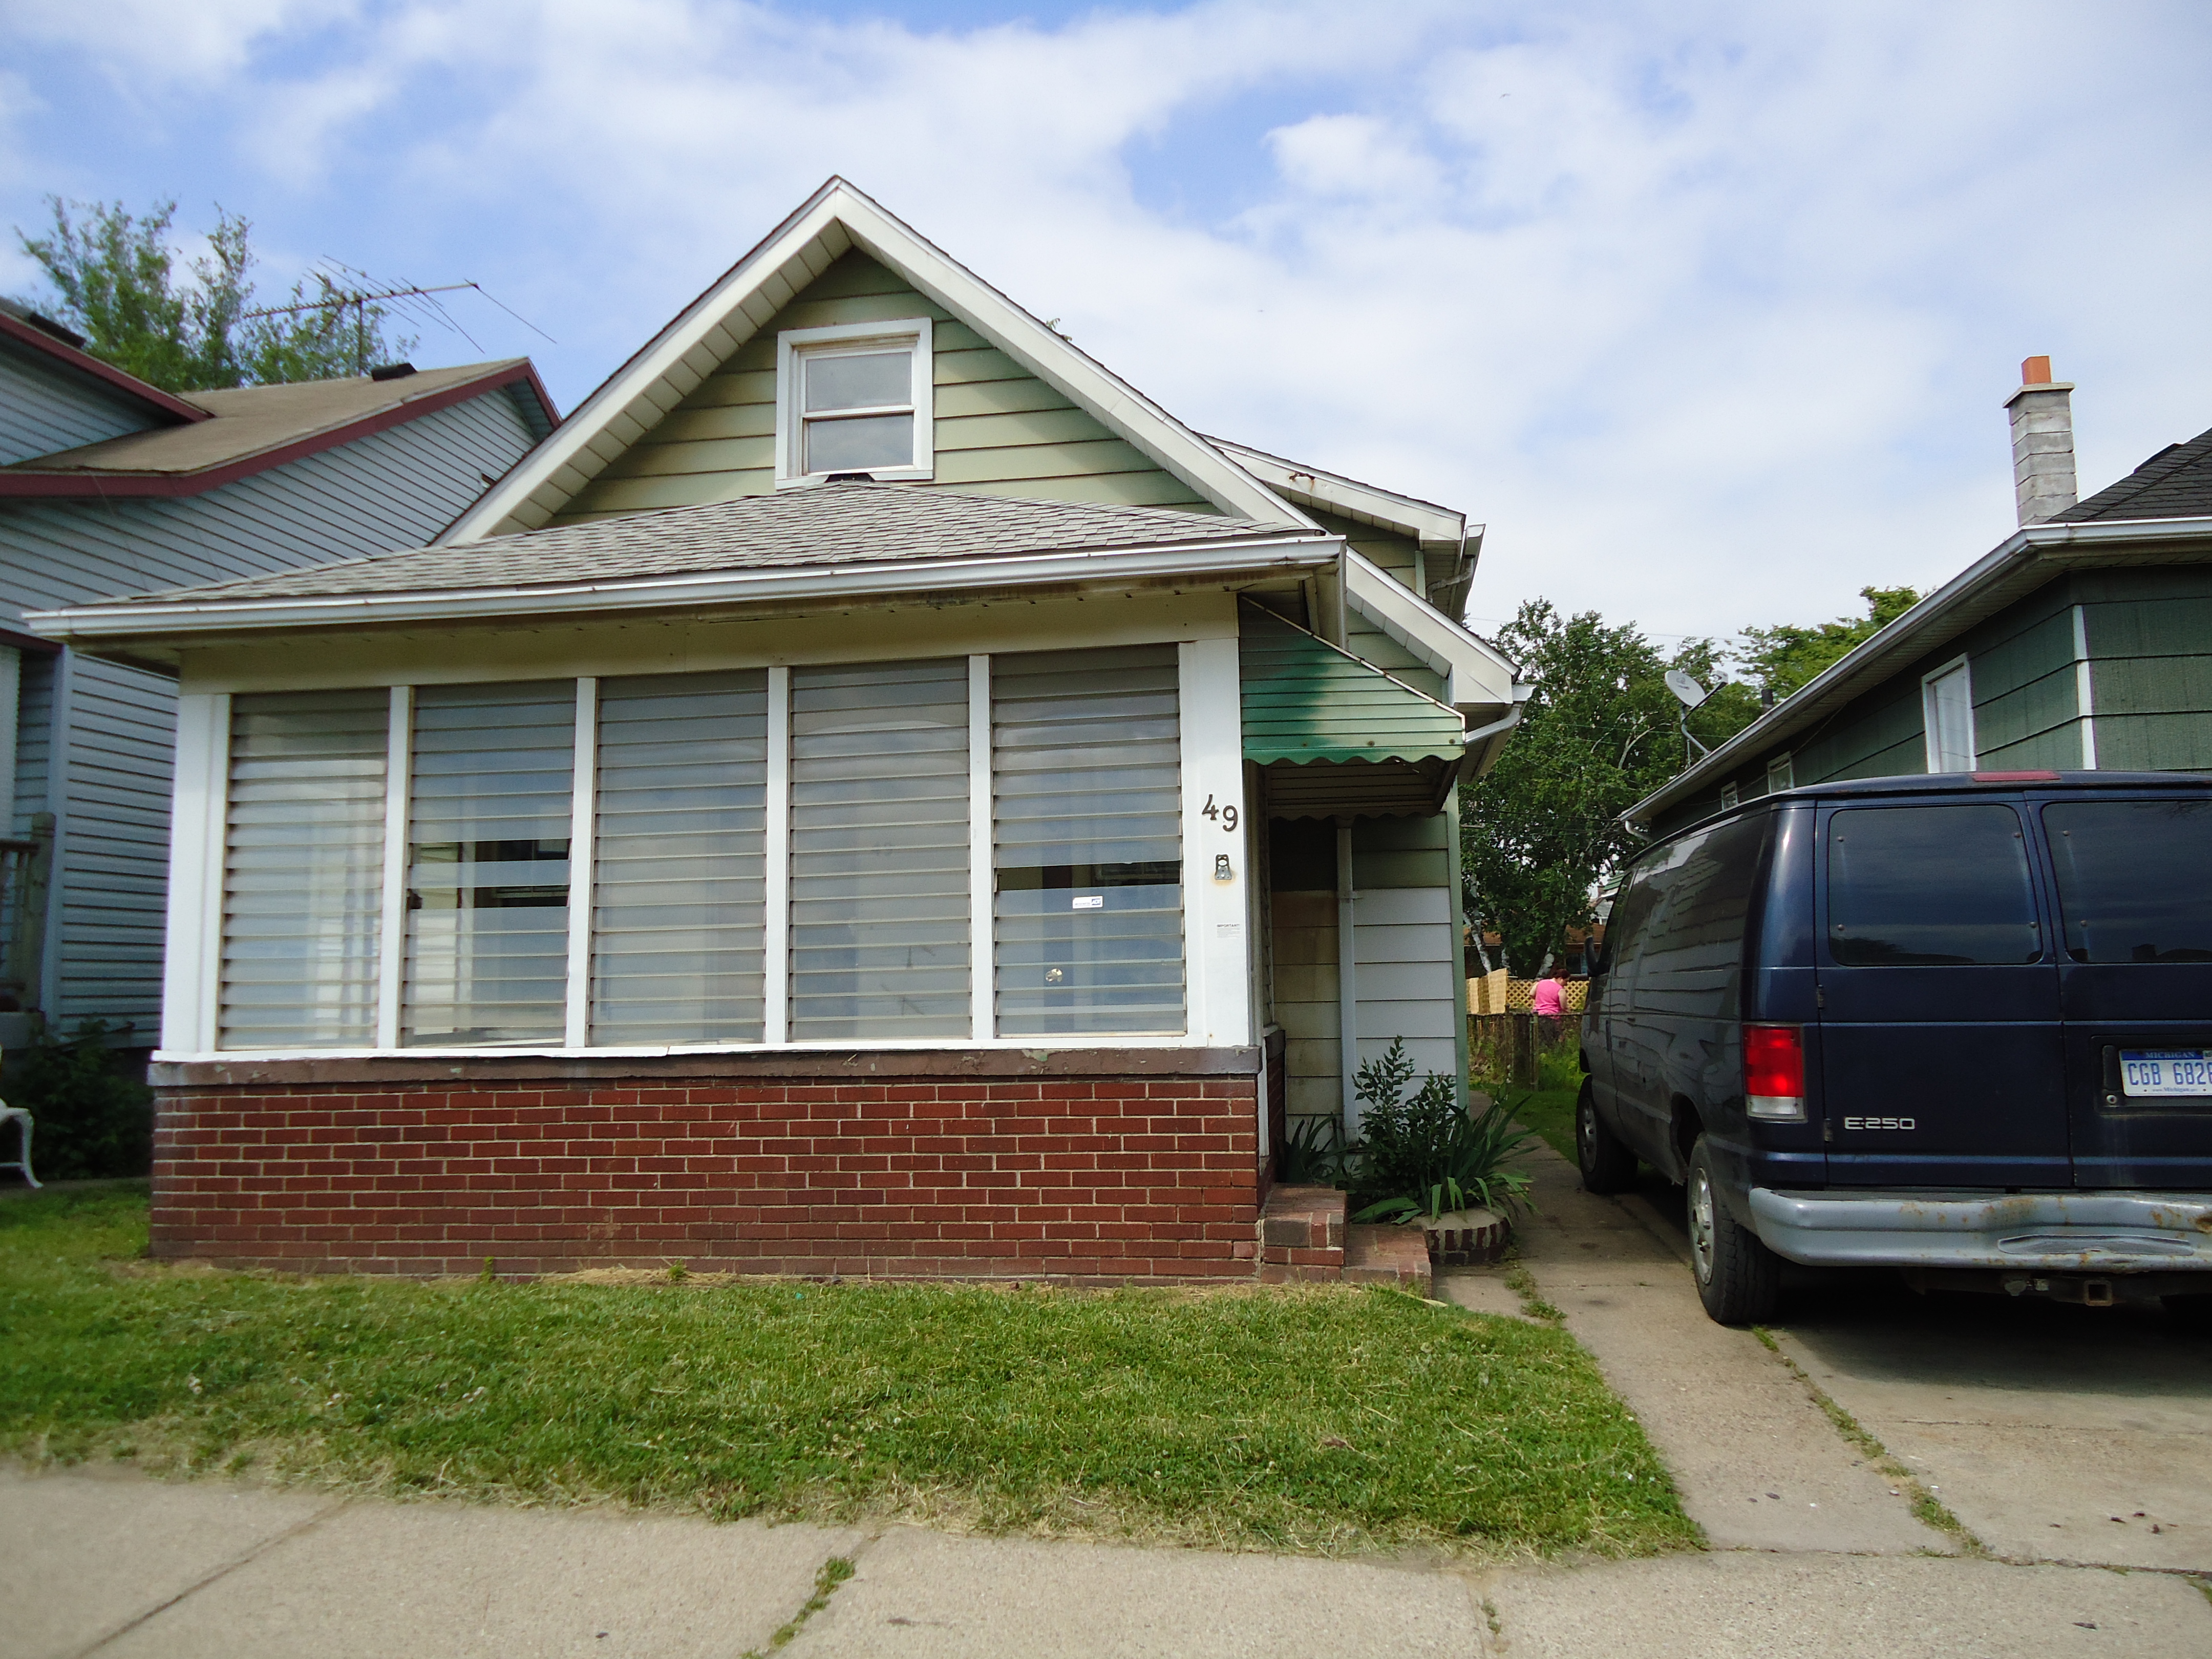  49 Orchard St, River Rouge, MI photo